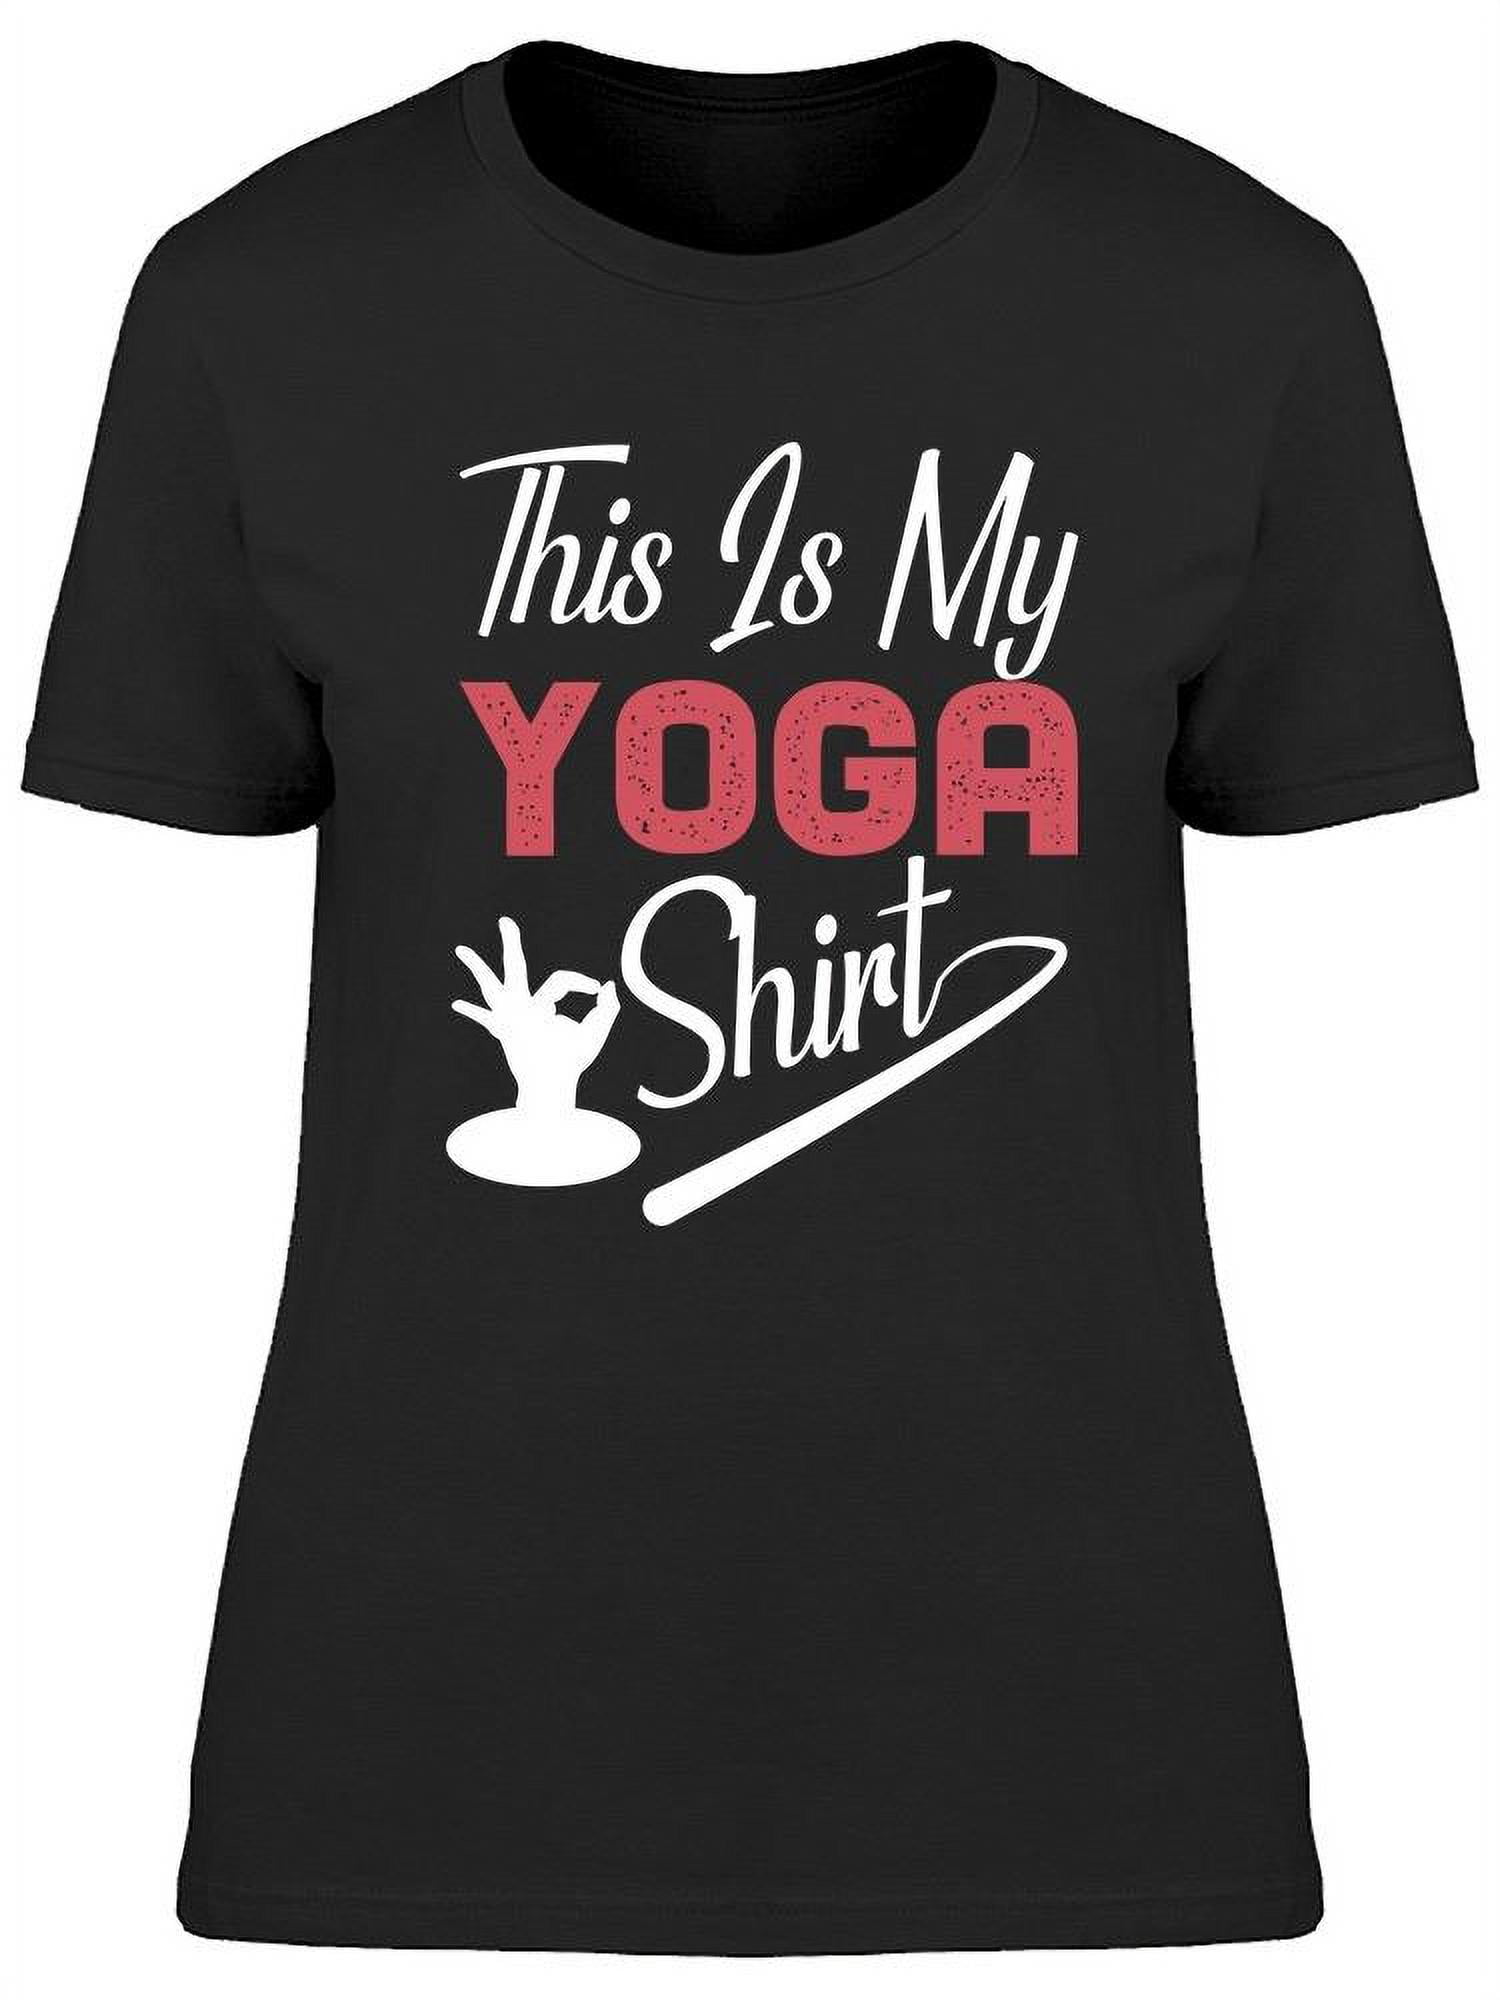 This Is My Yoga Shirt T-Shirt Women -Image by Shutterstock, Female x-Large